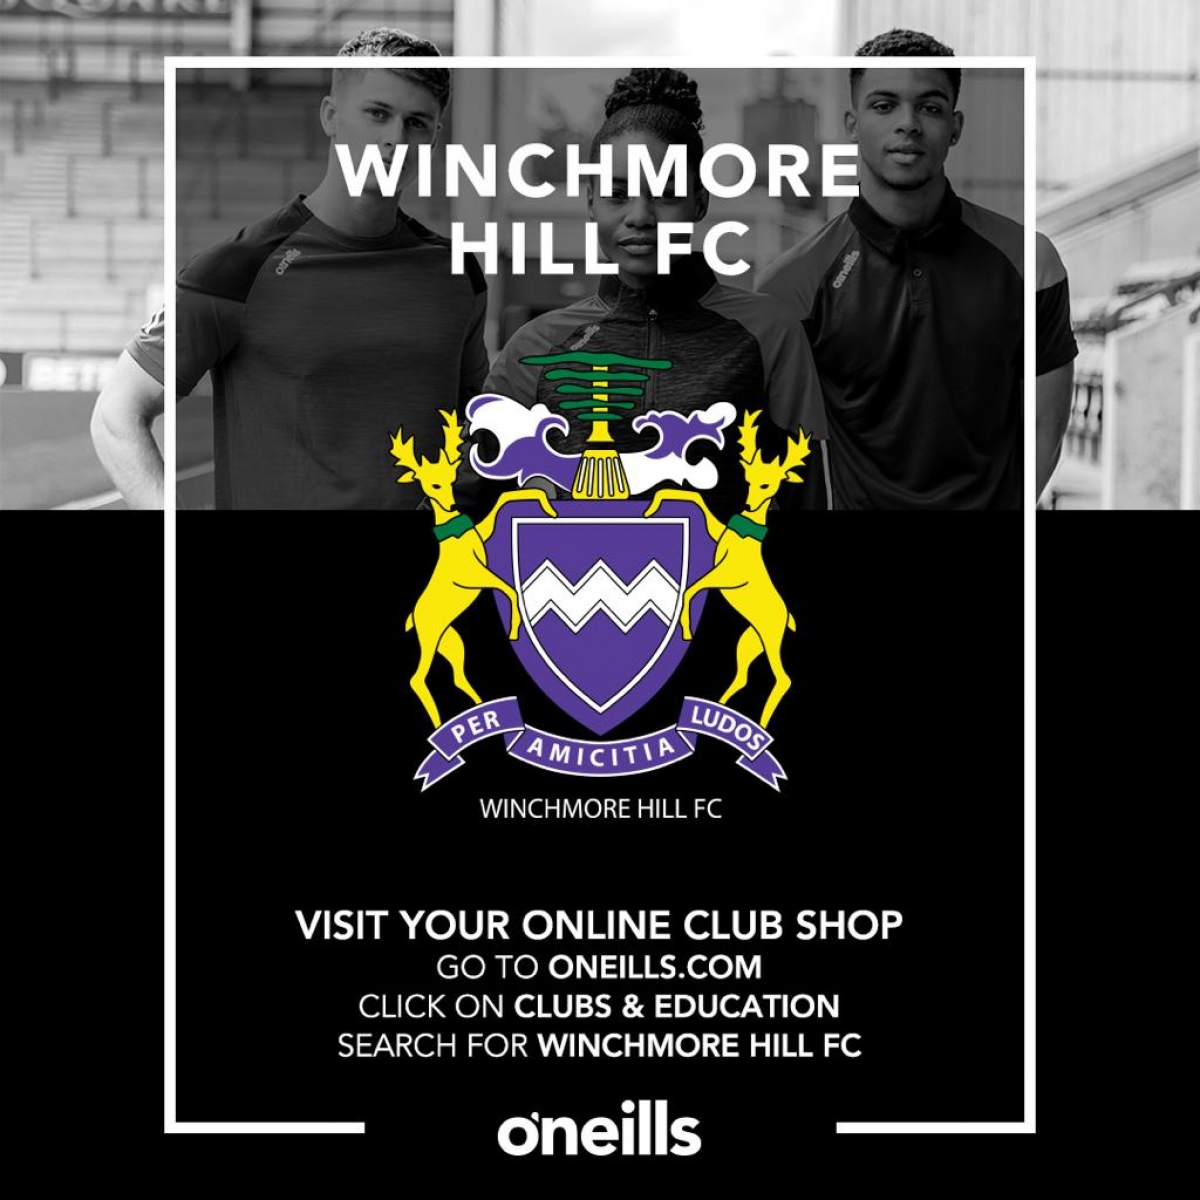 WHFC Branded Youth Kit Items Now Available